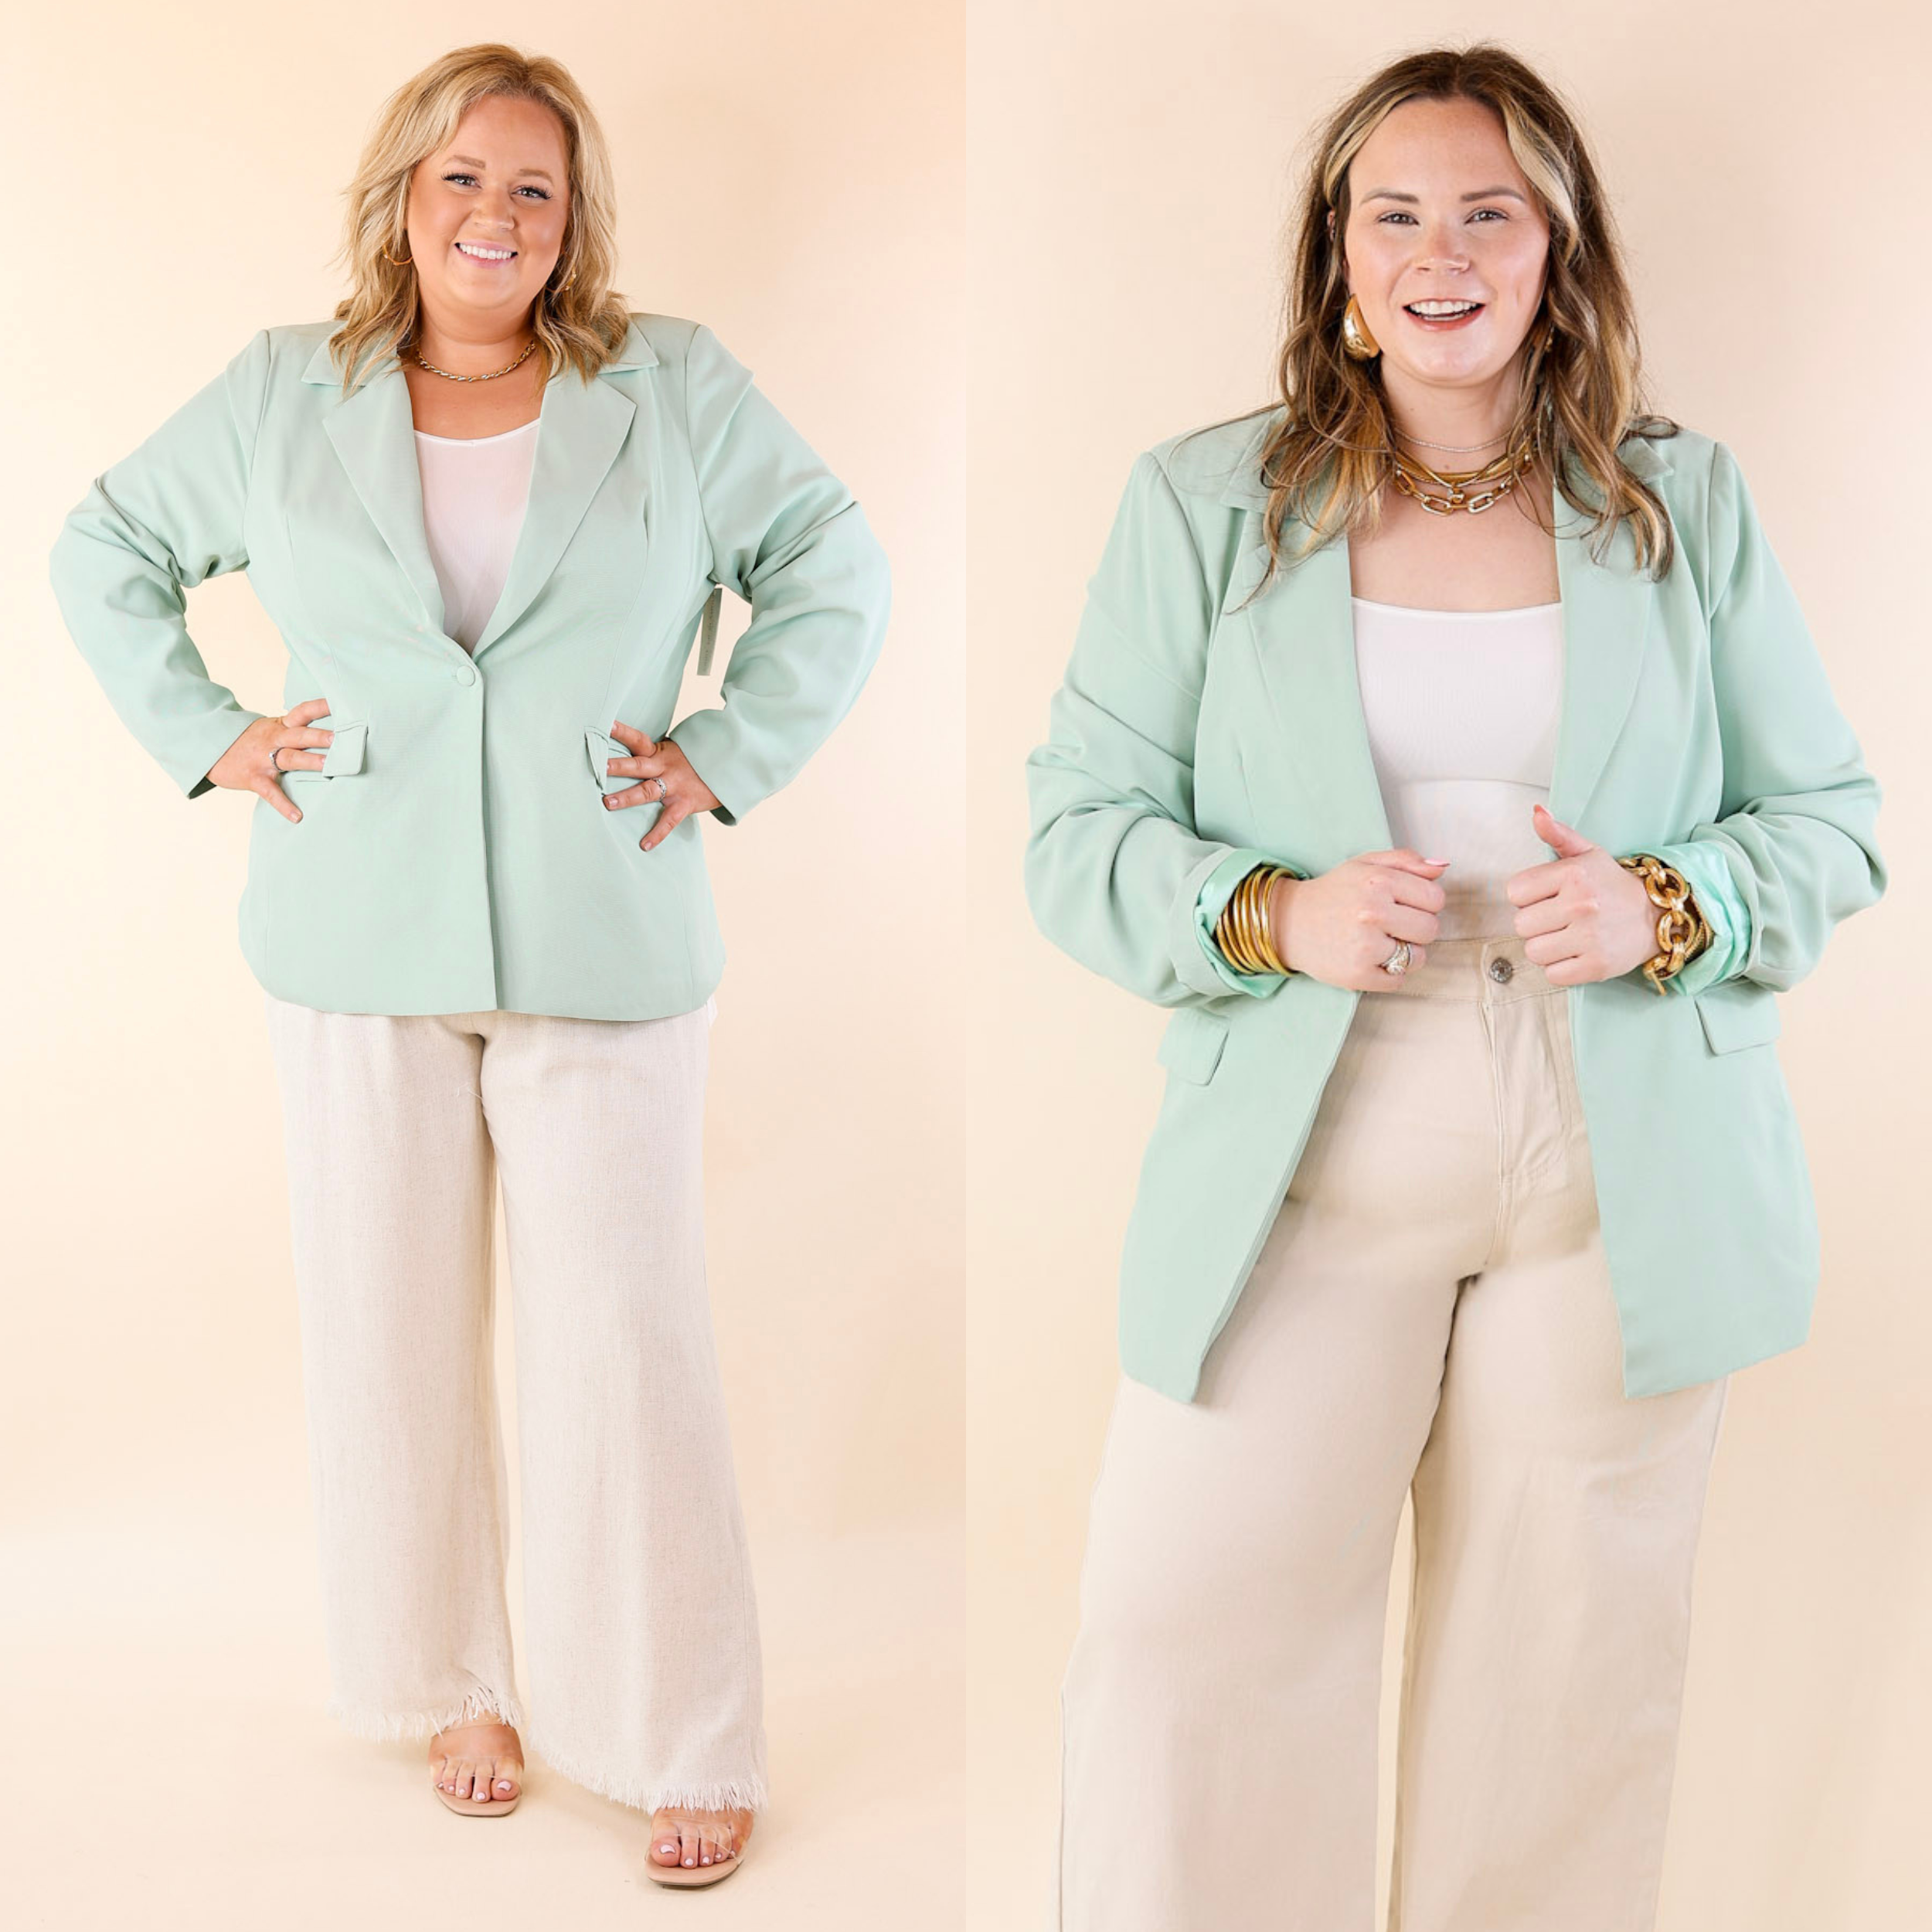 Winning Awards Long Sleeve Blazer in Mint Green - Giddy Up Glamour Boutique